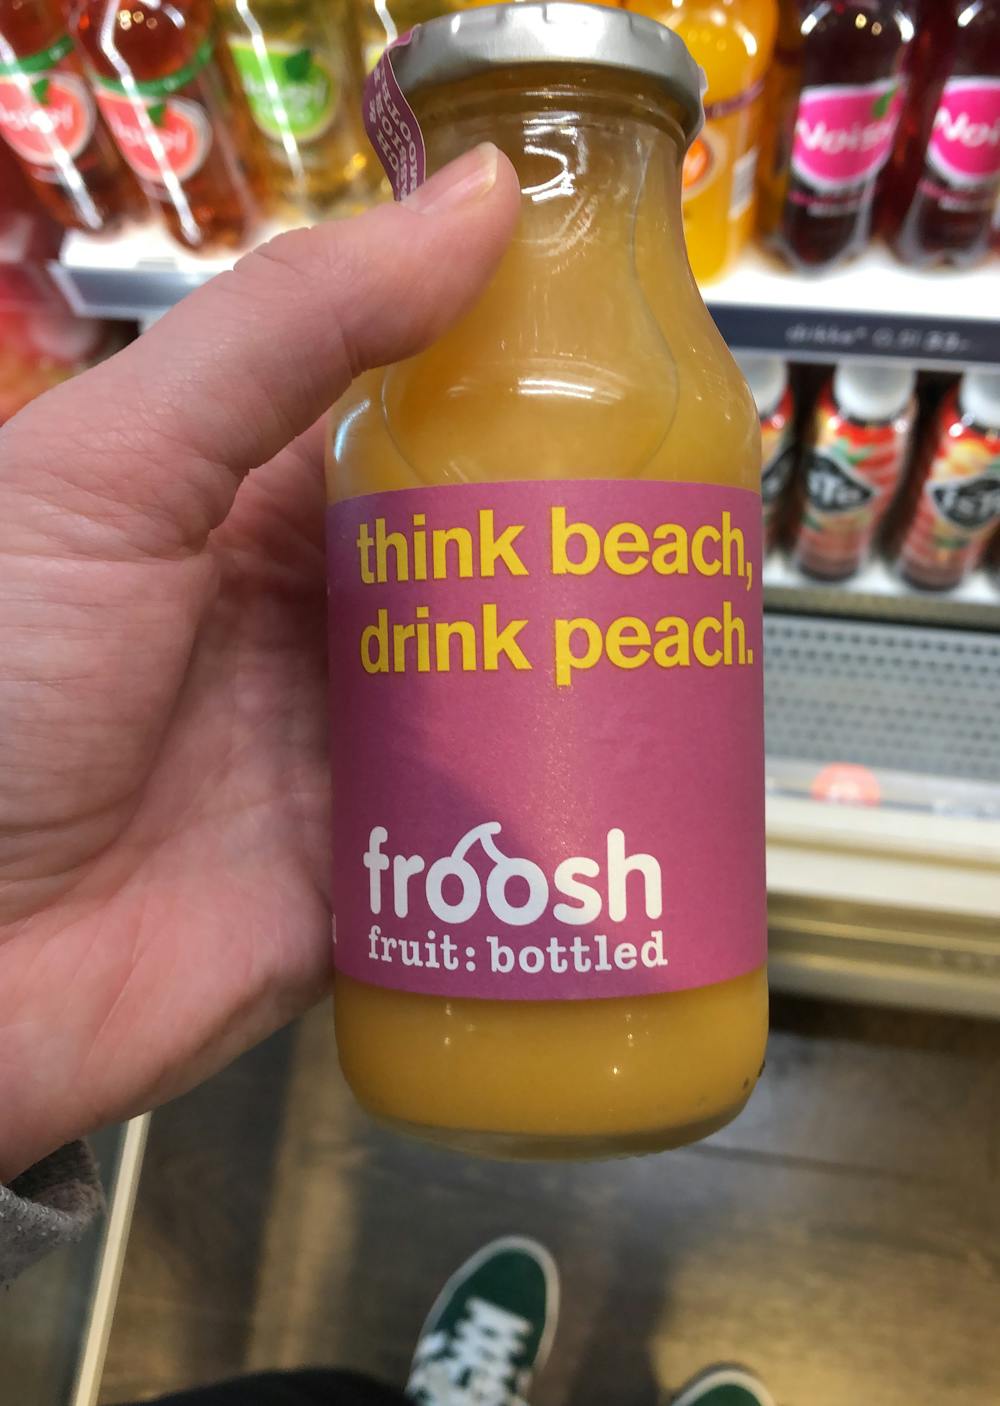 Think beach, drink peack, Froosh